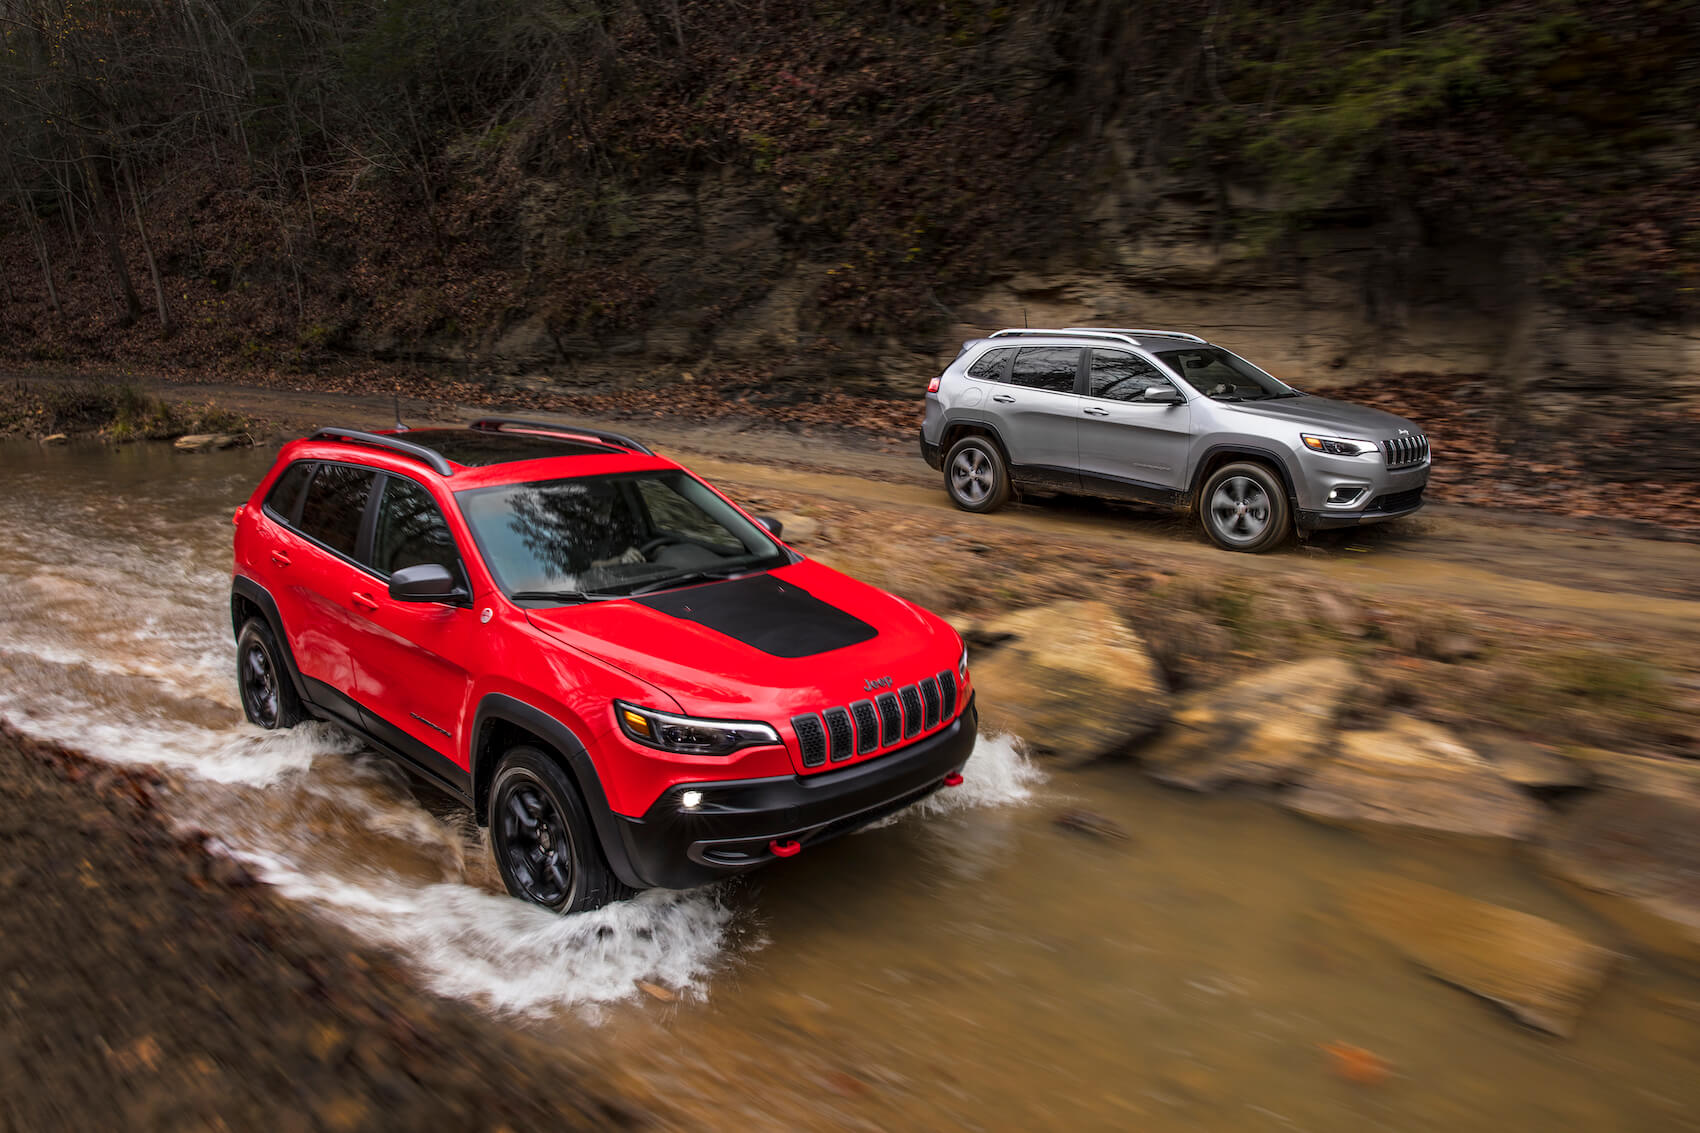 Jeep Cherokee Lease Advantages